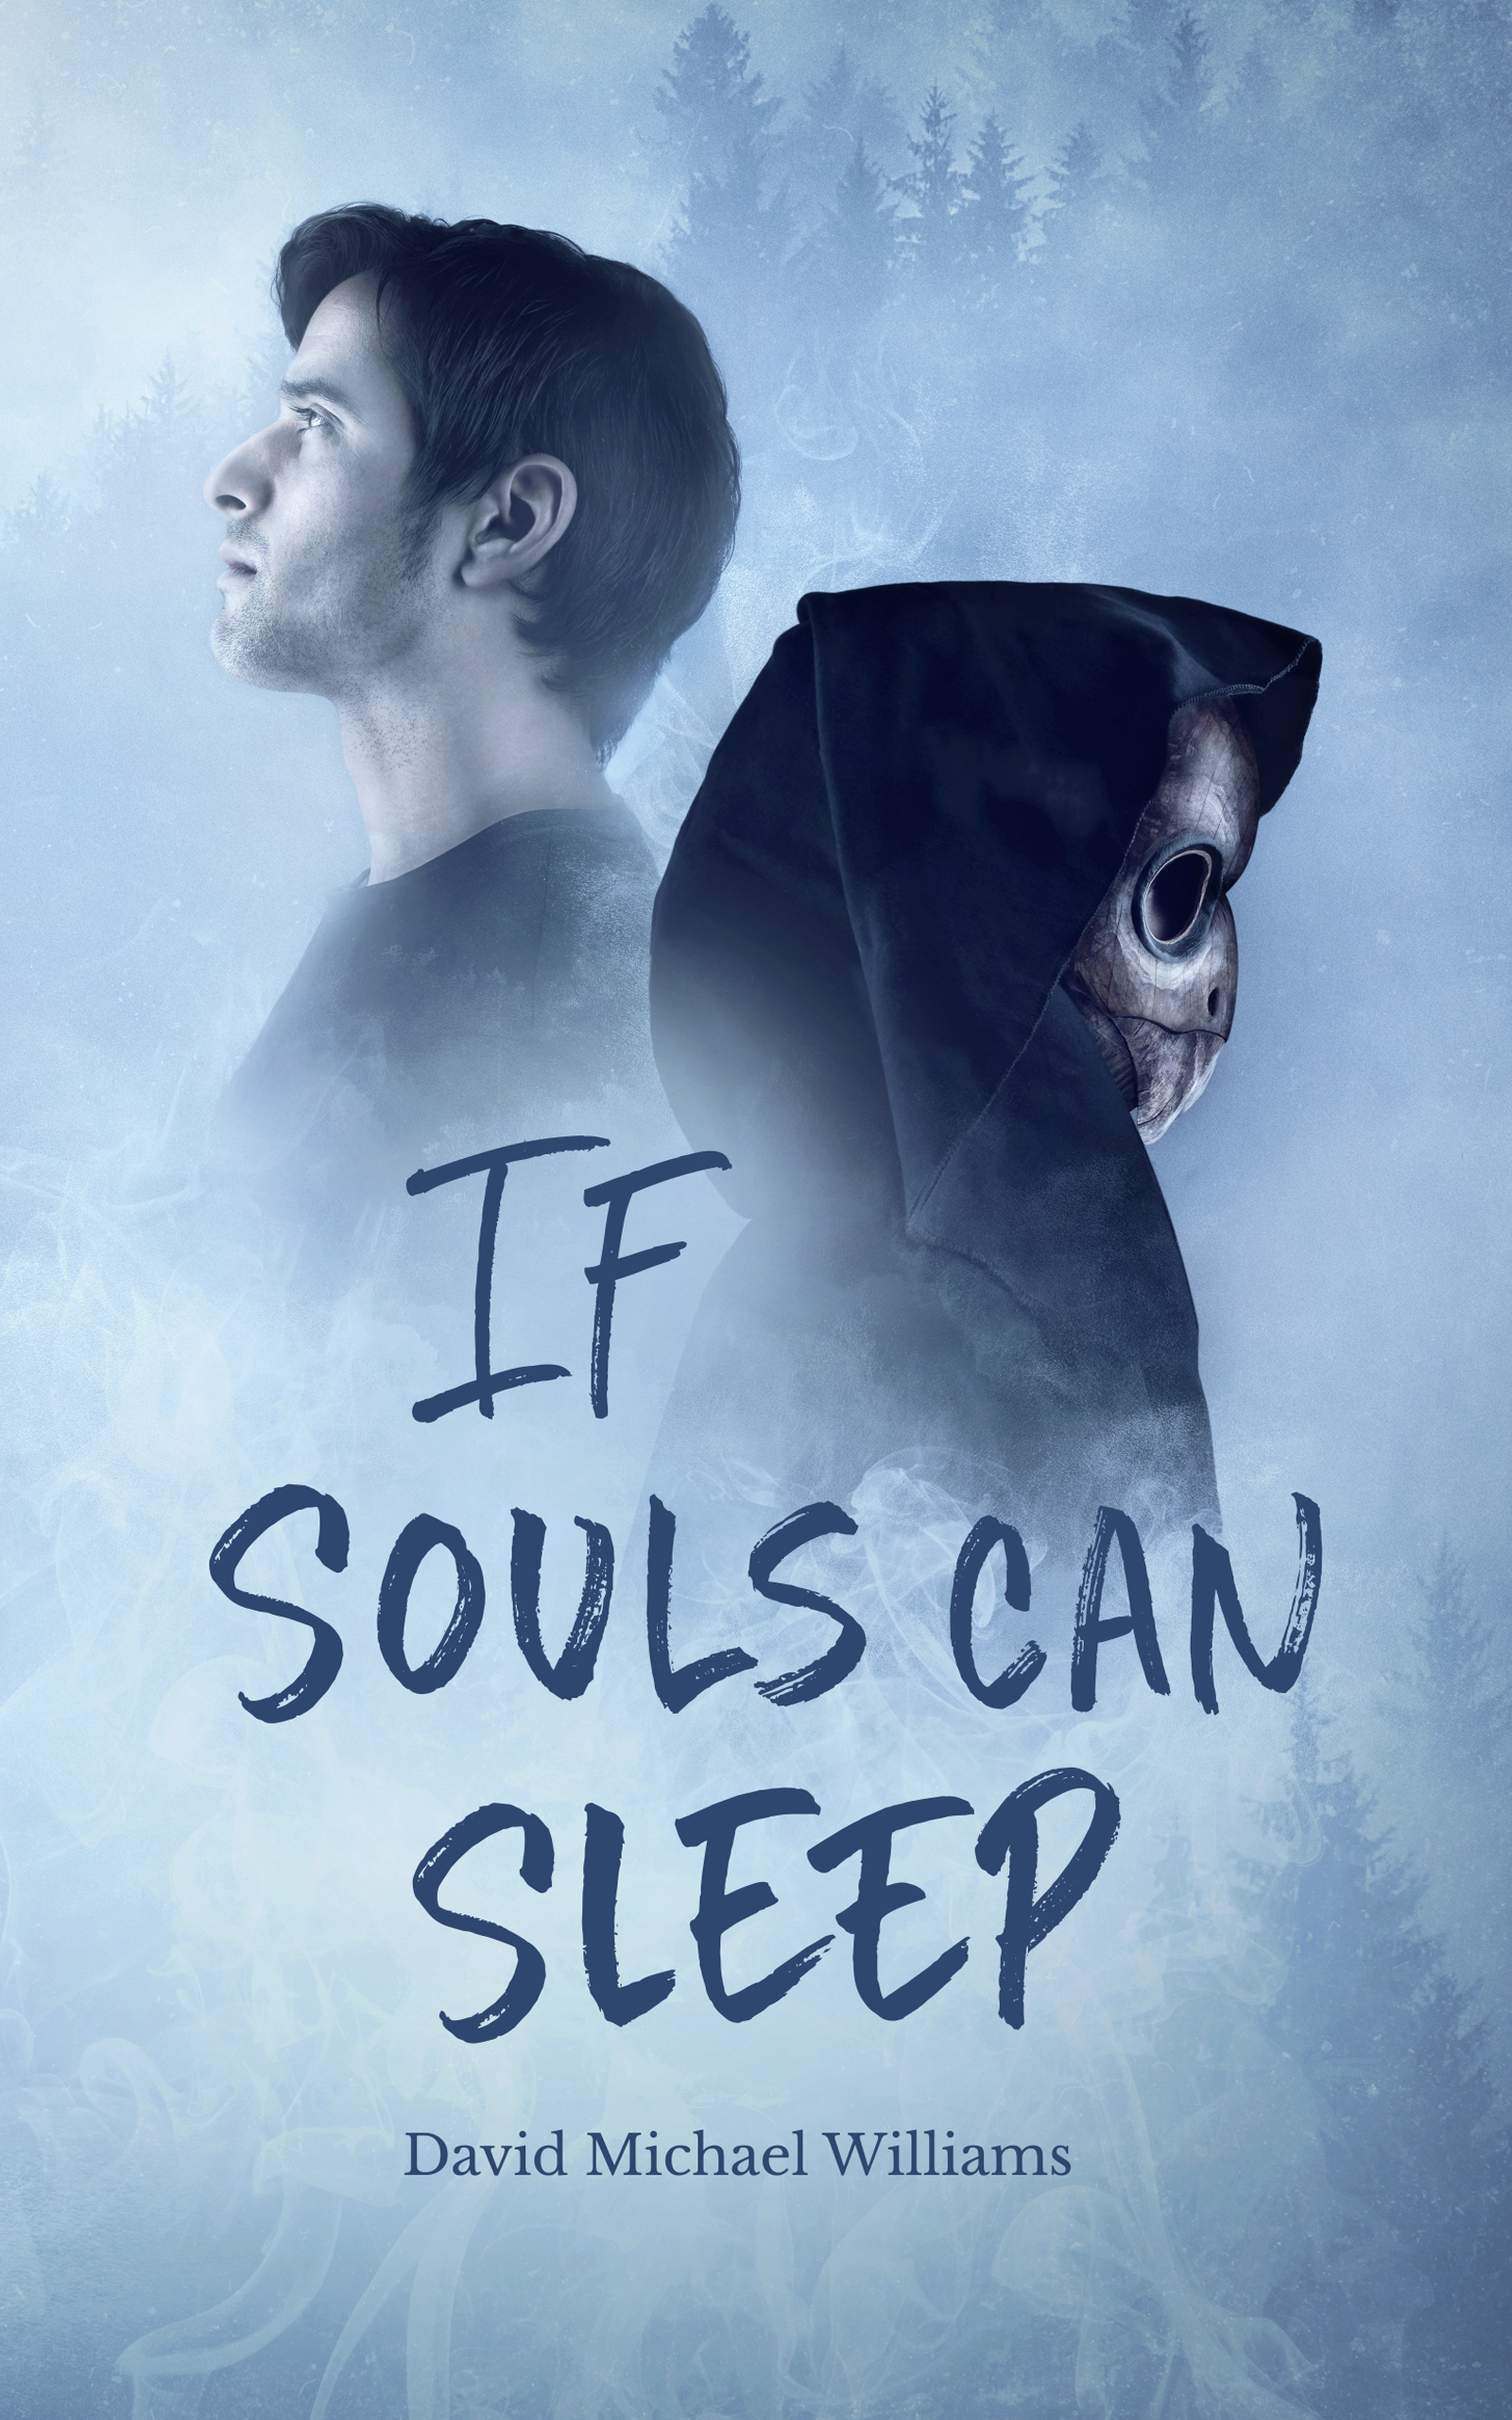 Cover of If Souls Can Sleep